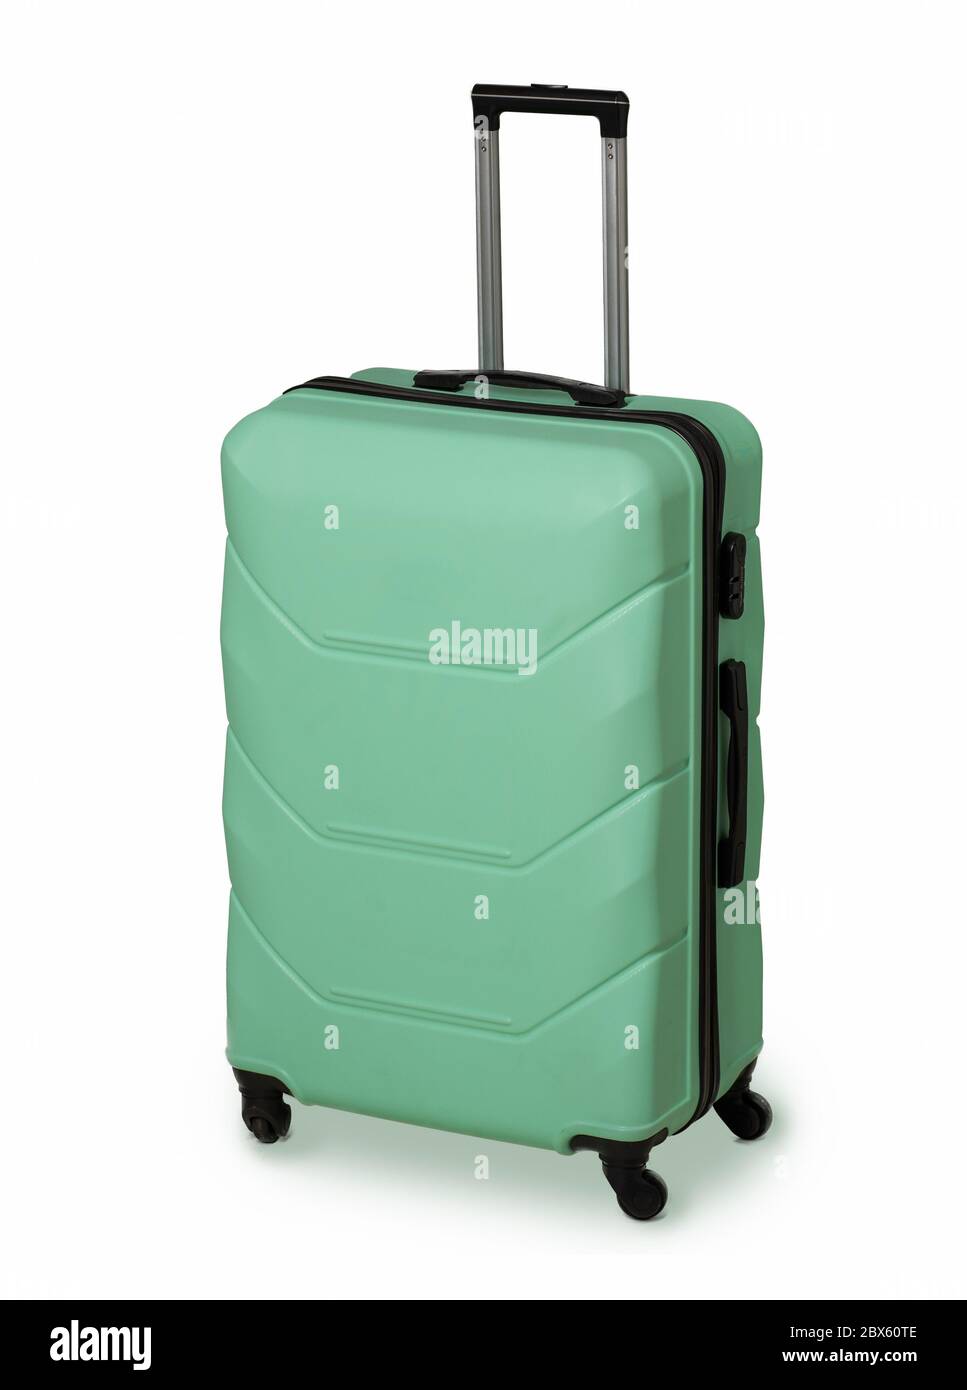 Mint Green suitcase for travel and reliable luggage storage. Plastic suitcase with wheels and retractable handle. Vacation concept. Luggage protection Stock Photo